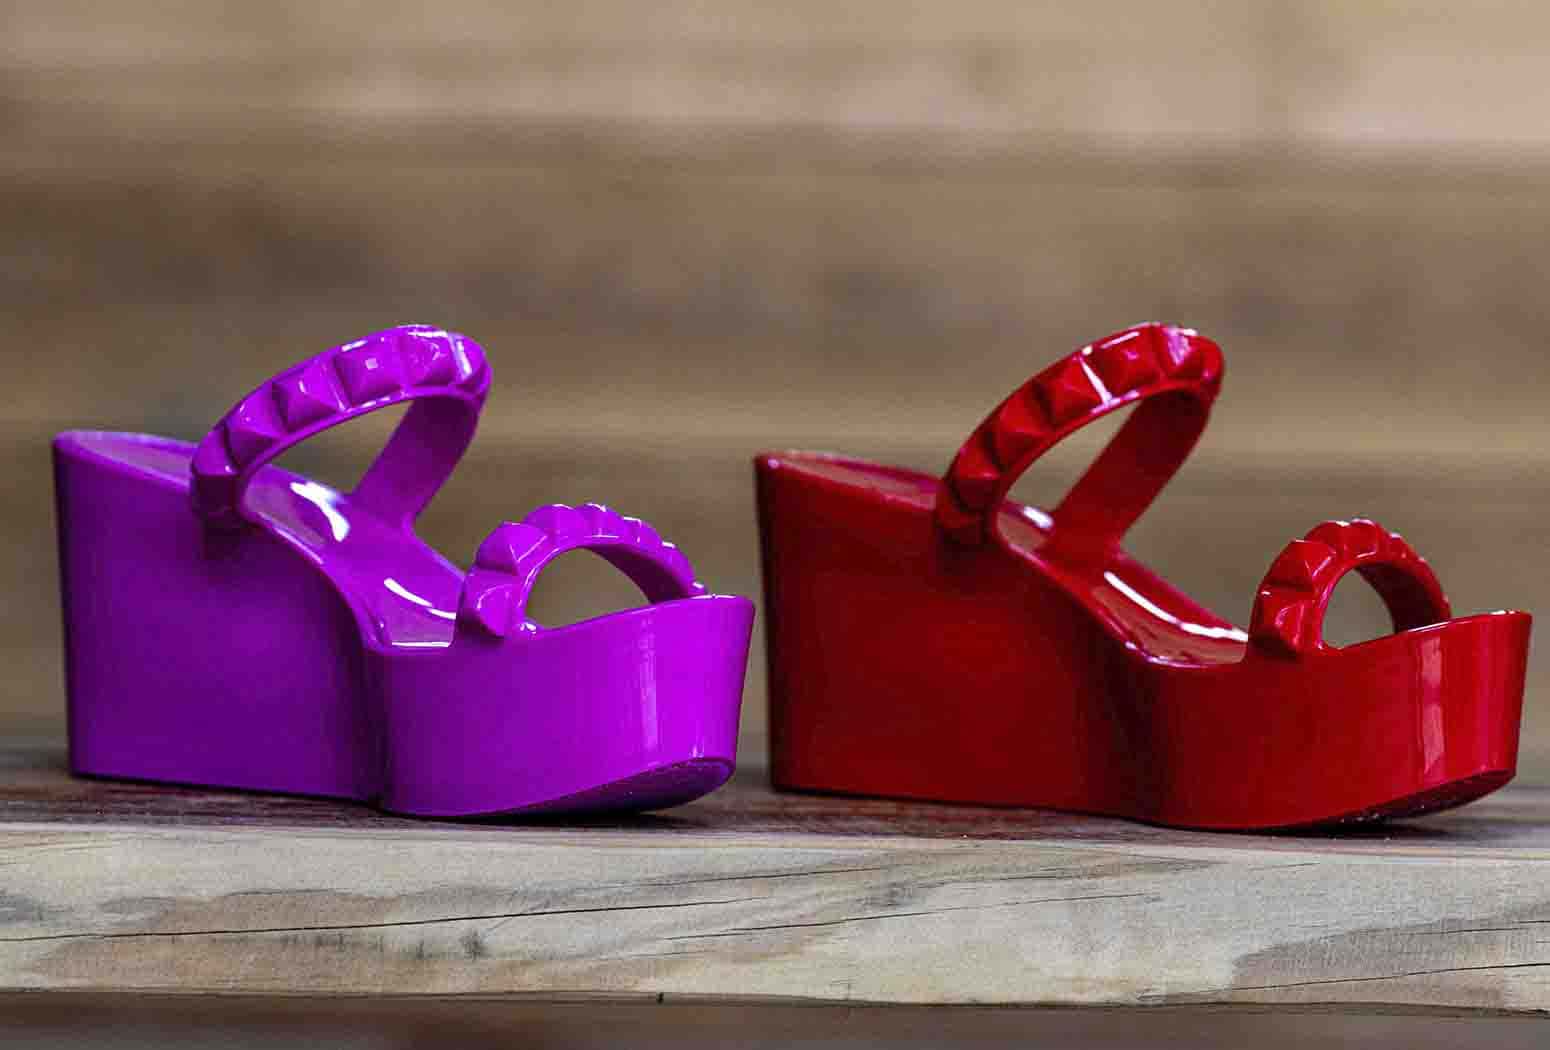 Stepping into Style: The Wedge Heels and Jelly Sandals Revolution